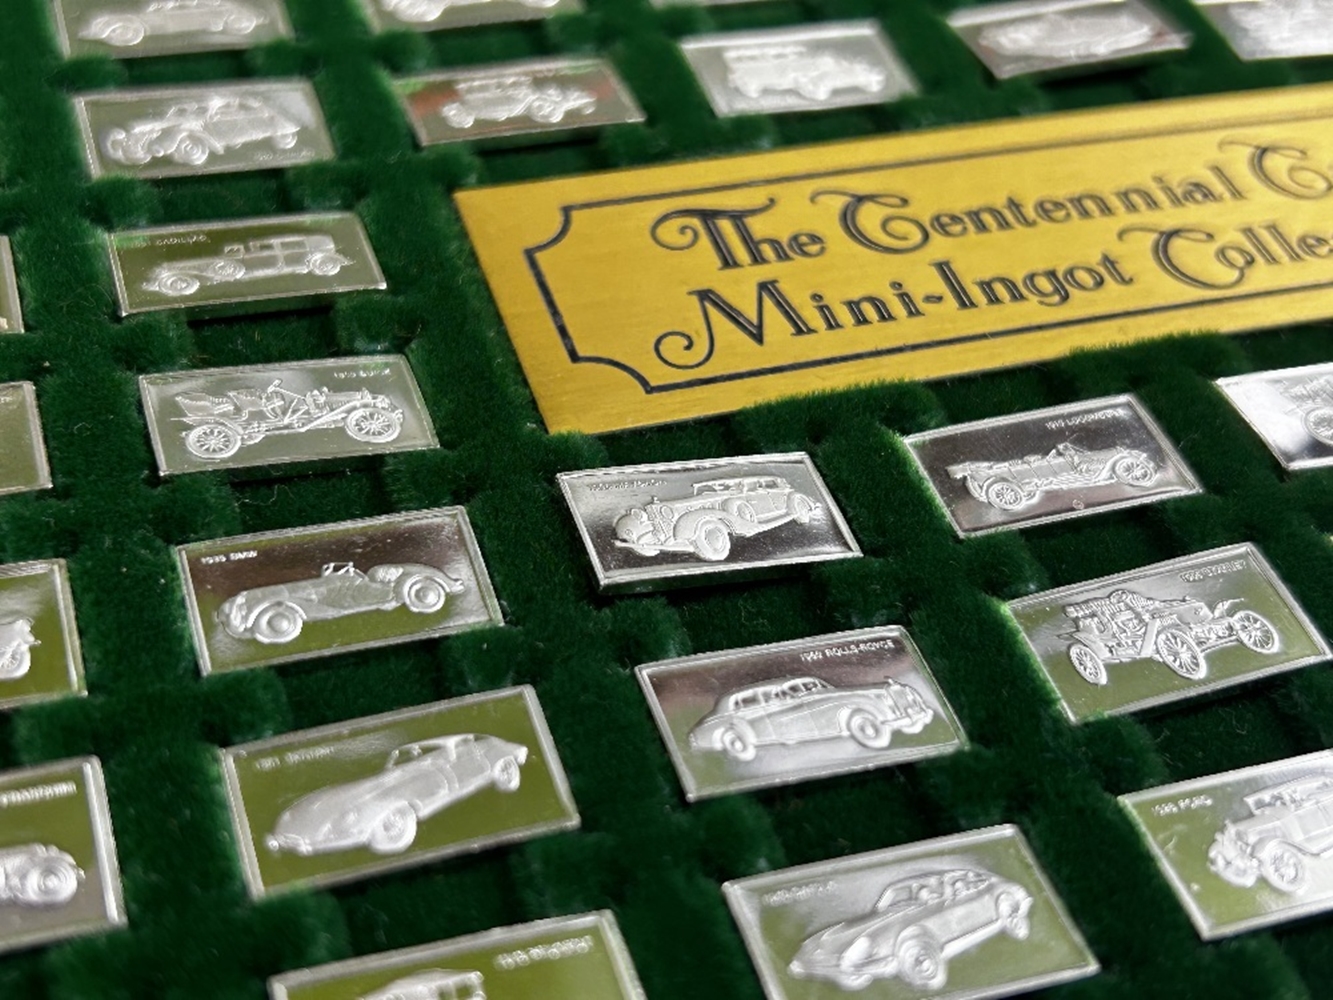 Franklin Mint &#8211; The Centennial Car Silver Mini Ingot Collection - Image 11 of 12